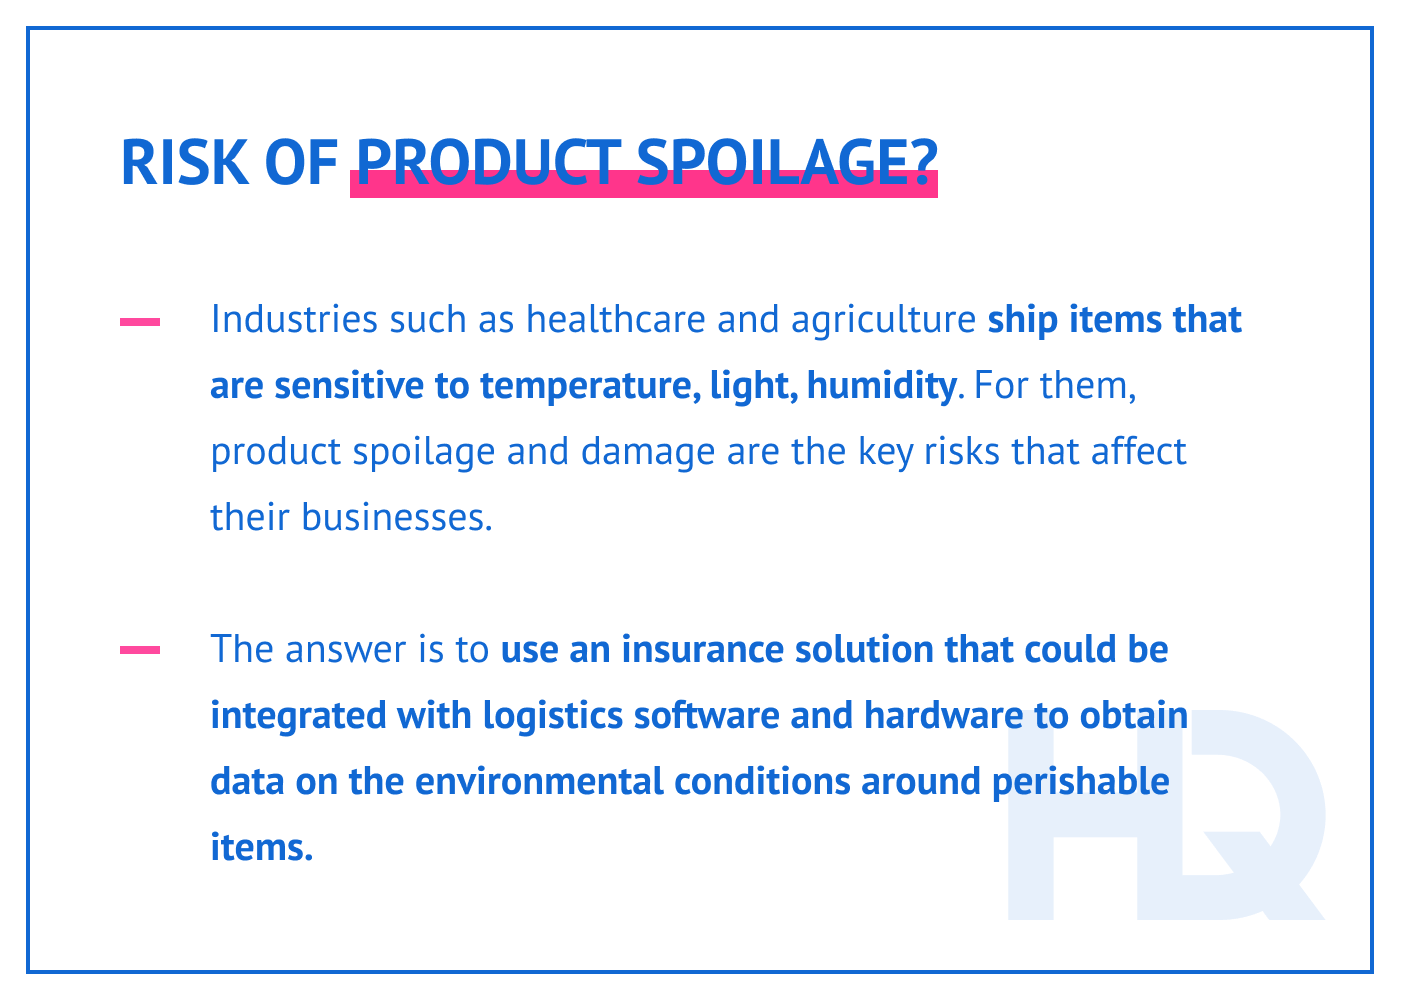 How the risk of product spoilage is mitigated.